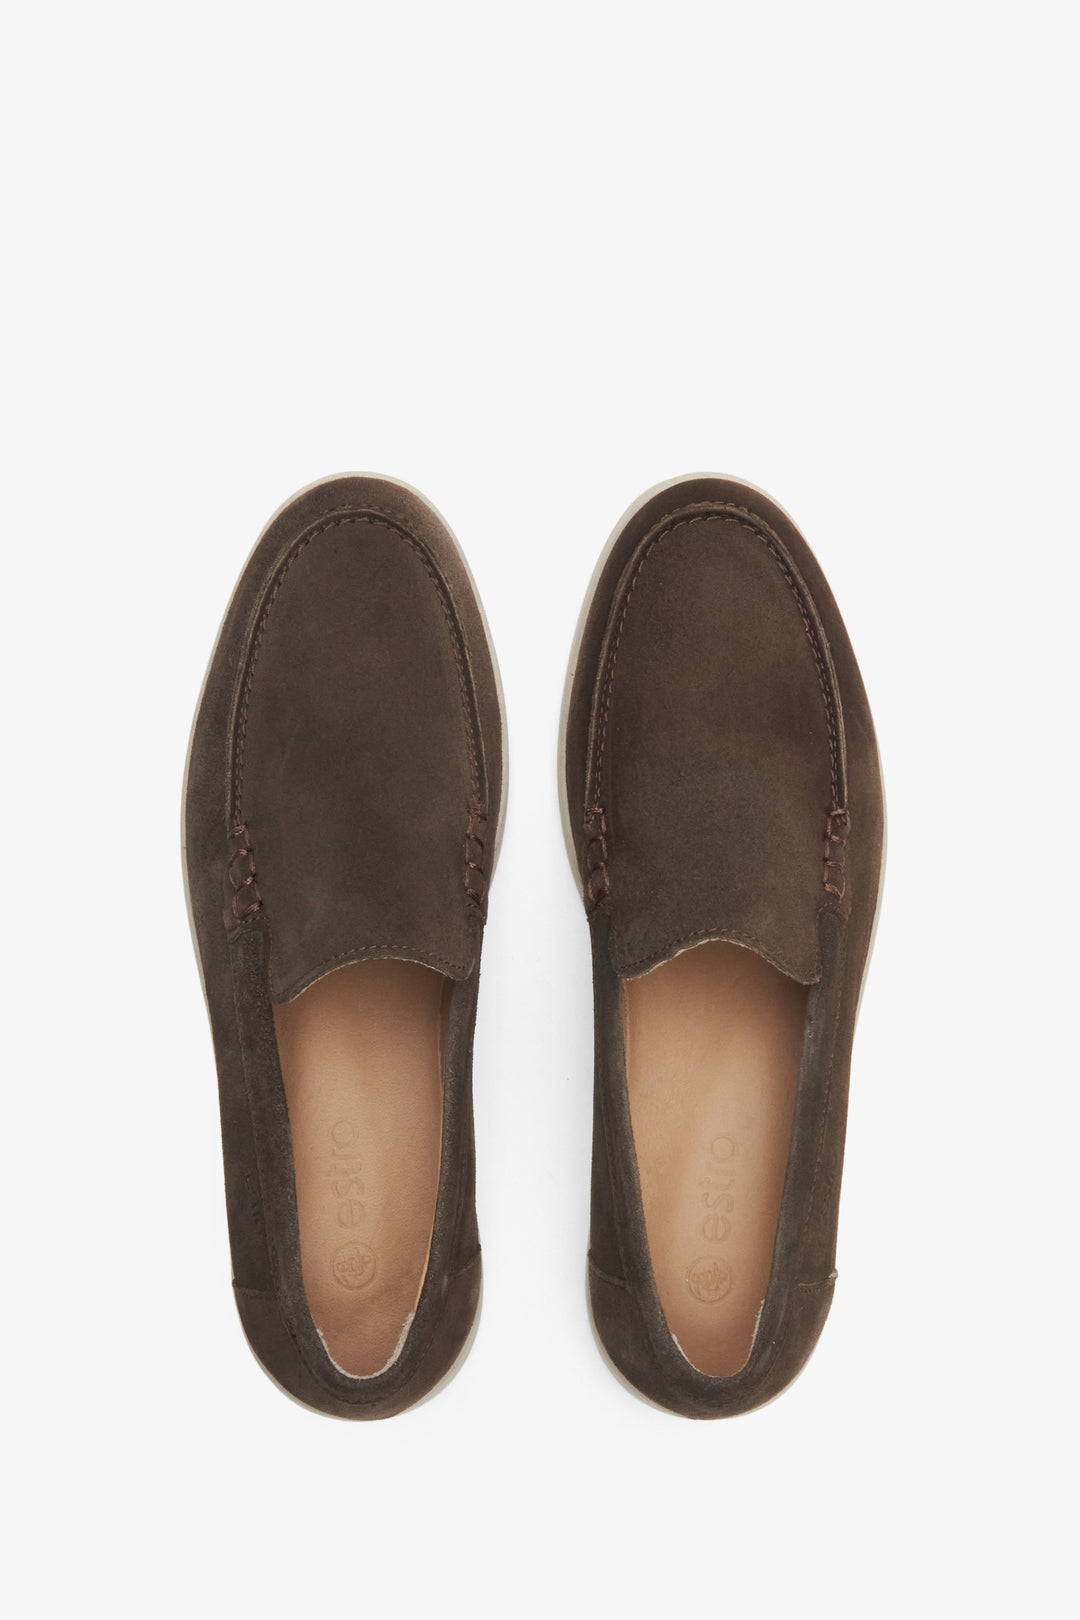 Women's velour loafers in saddle brown by Estro - presentation of footwear from above.